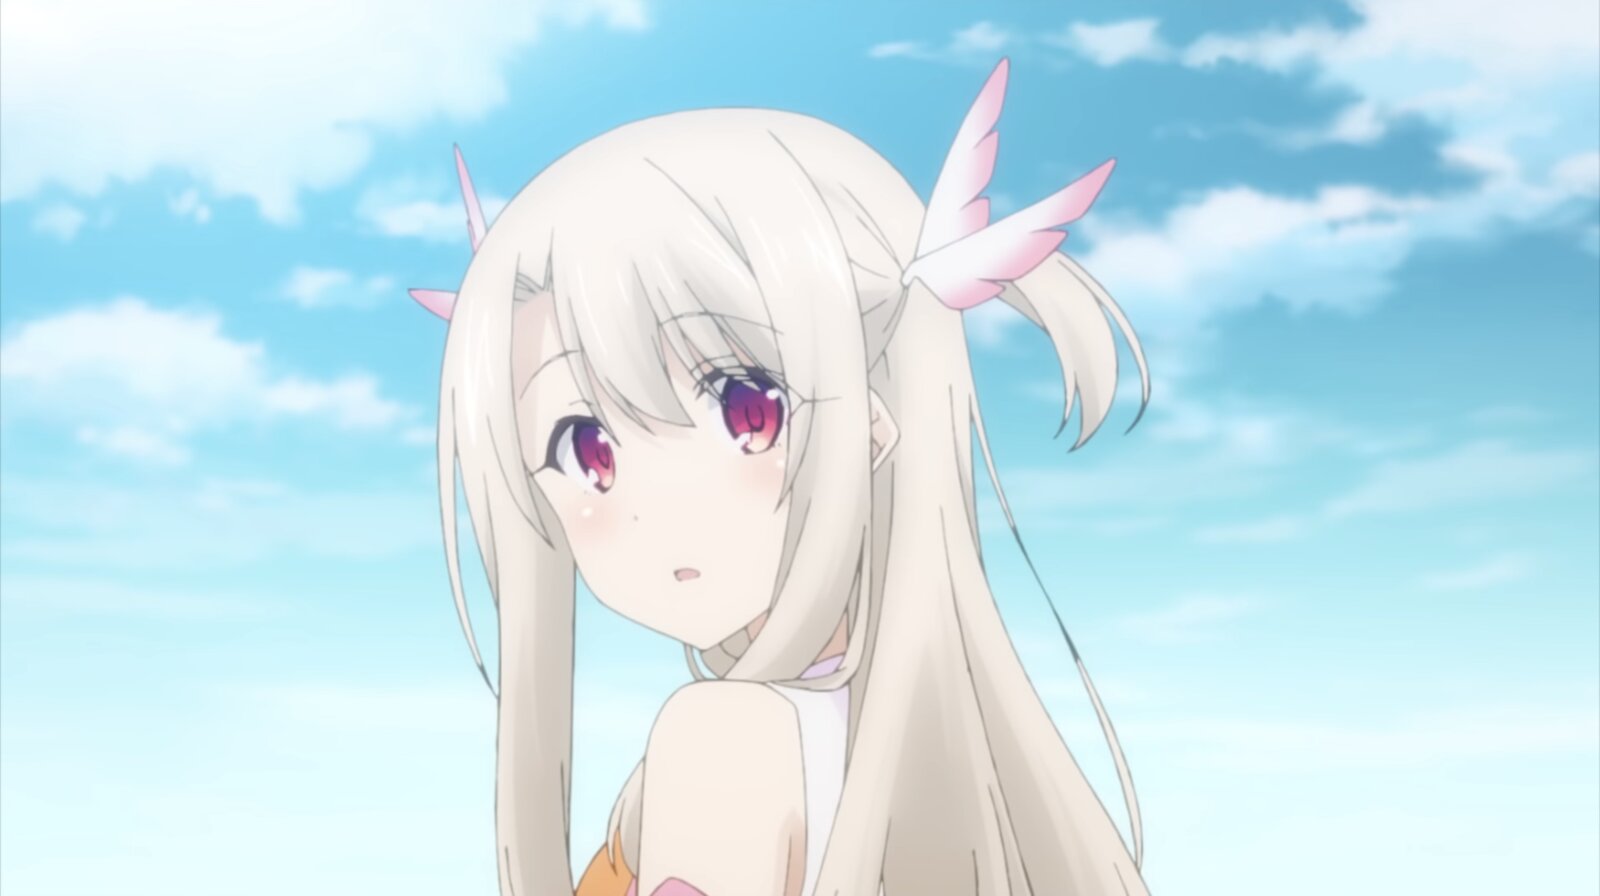 Fate/kaleid liner Prisma Illya Movie Confirms Open Date! | Anime